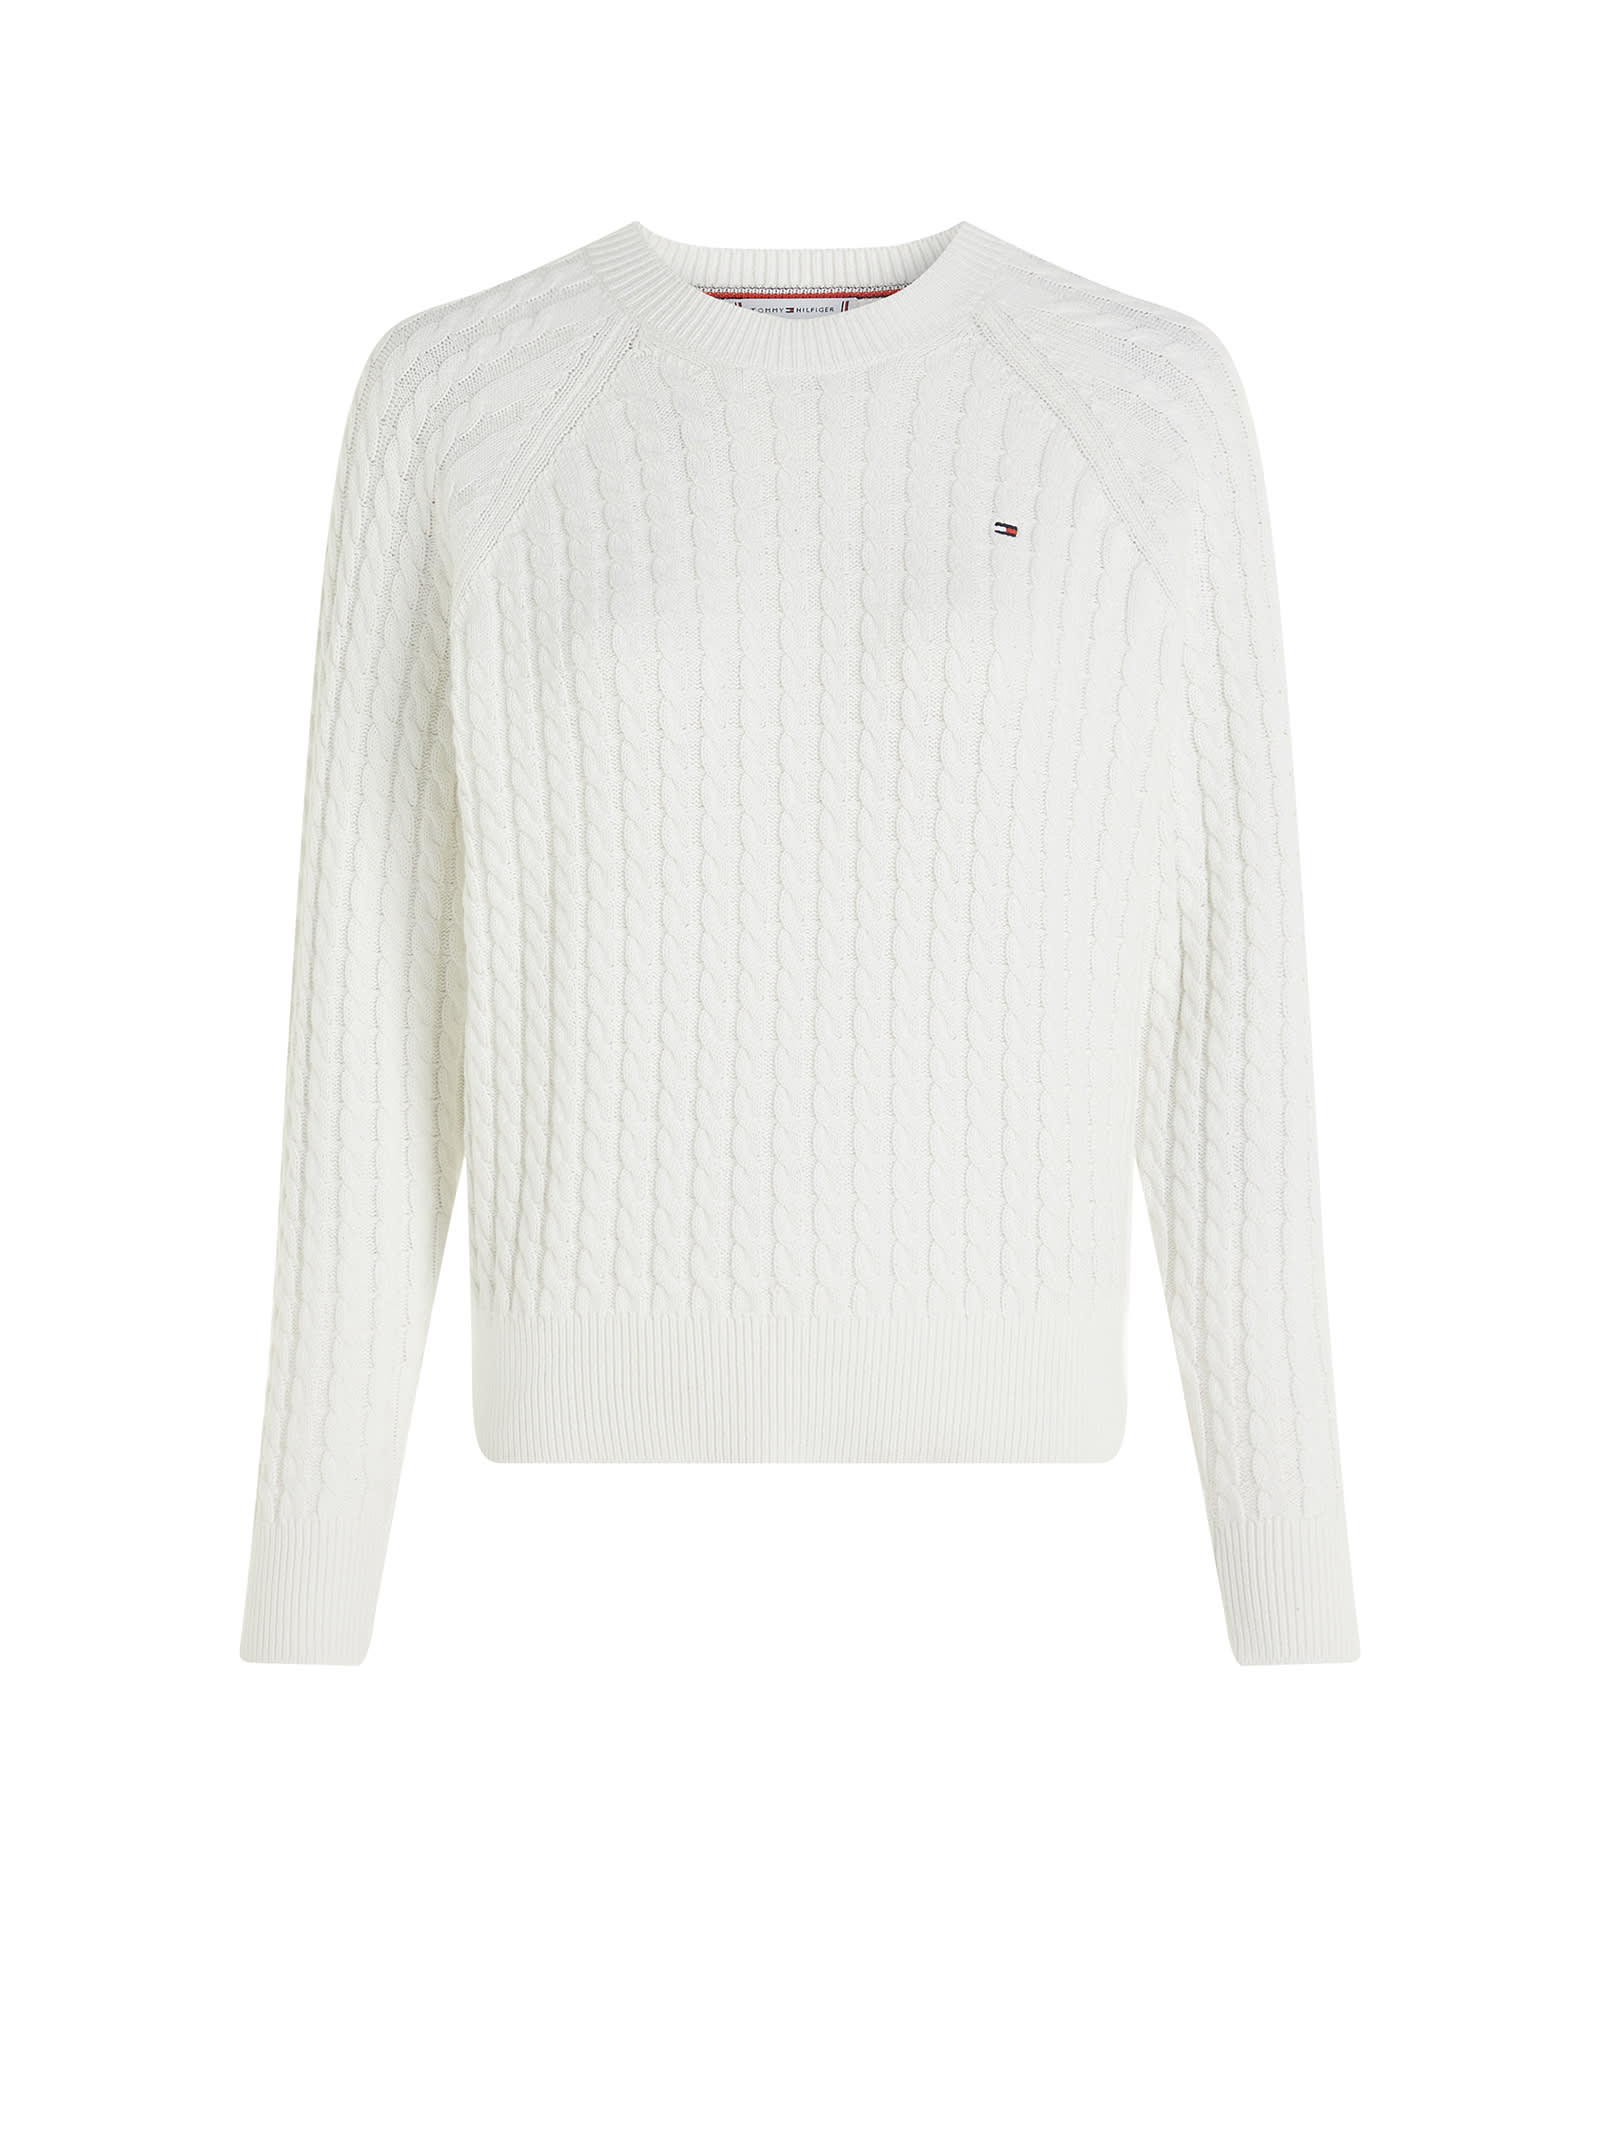 White Relaxed-fit Sweater In Woven Knit